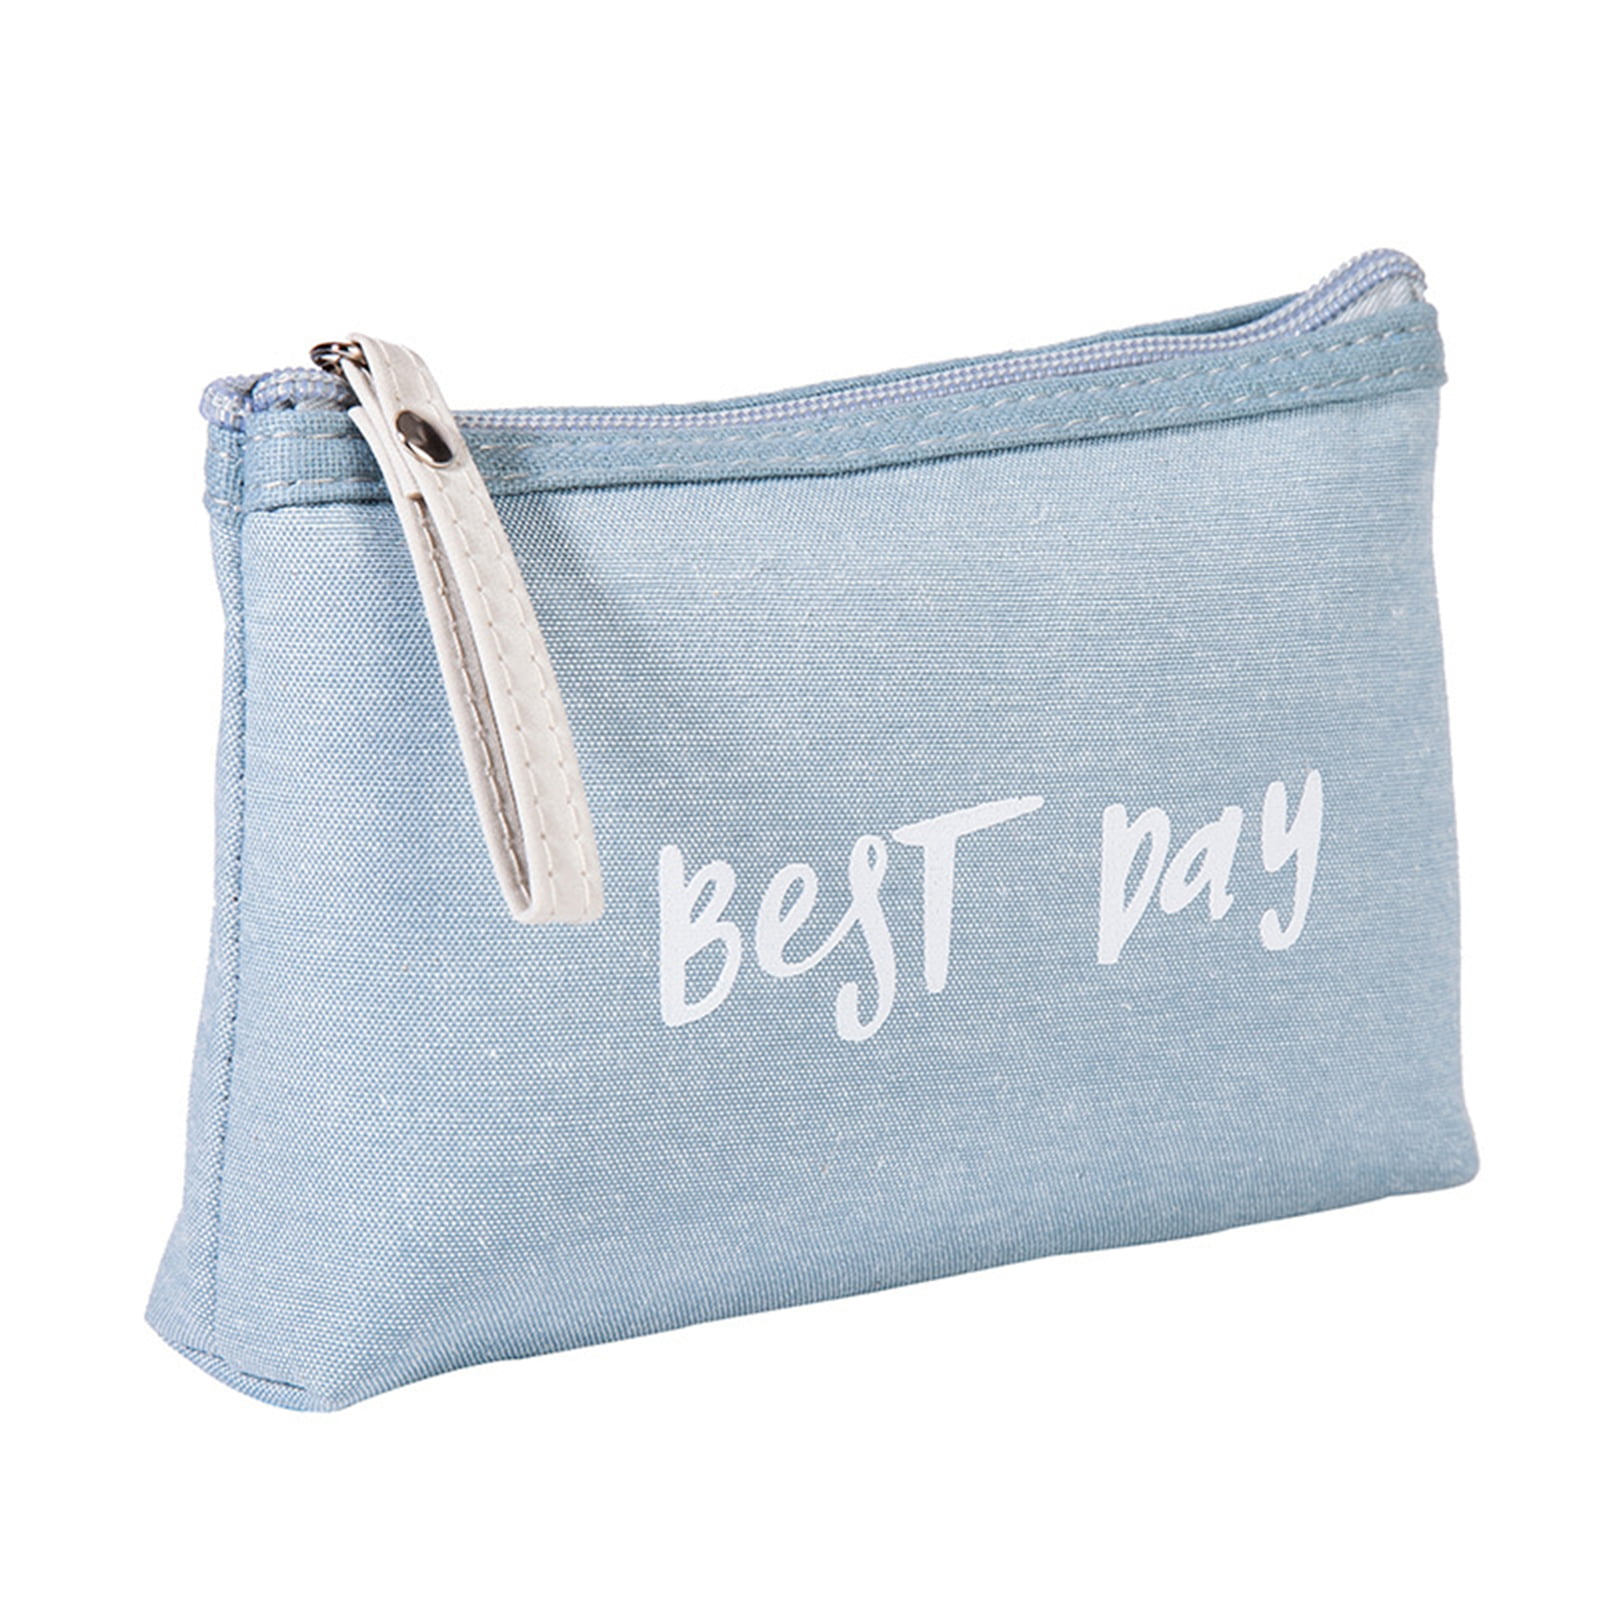 Makeup Toiletry Pouch Cosmetic Bag Cases Make Up Organizer Famous Women  Travel Bags Clutch Ladies Cluch Purses Handbags Purses Mini Wallets 12 68  From Shoesnumen, $30.21